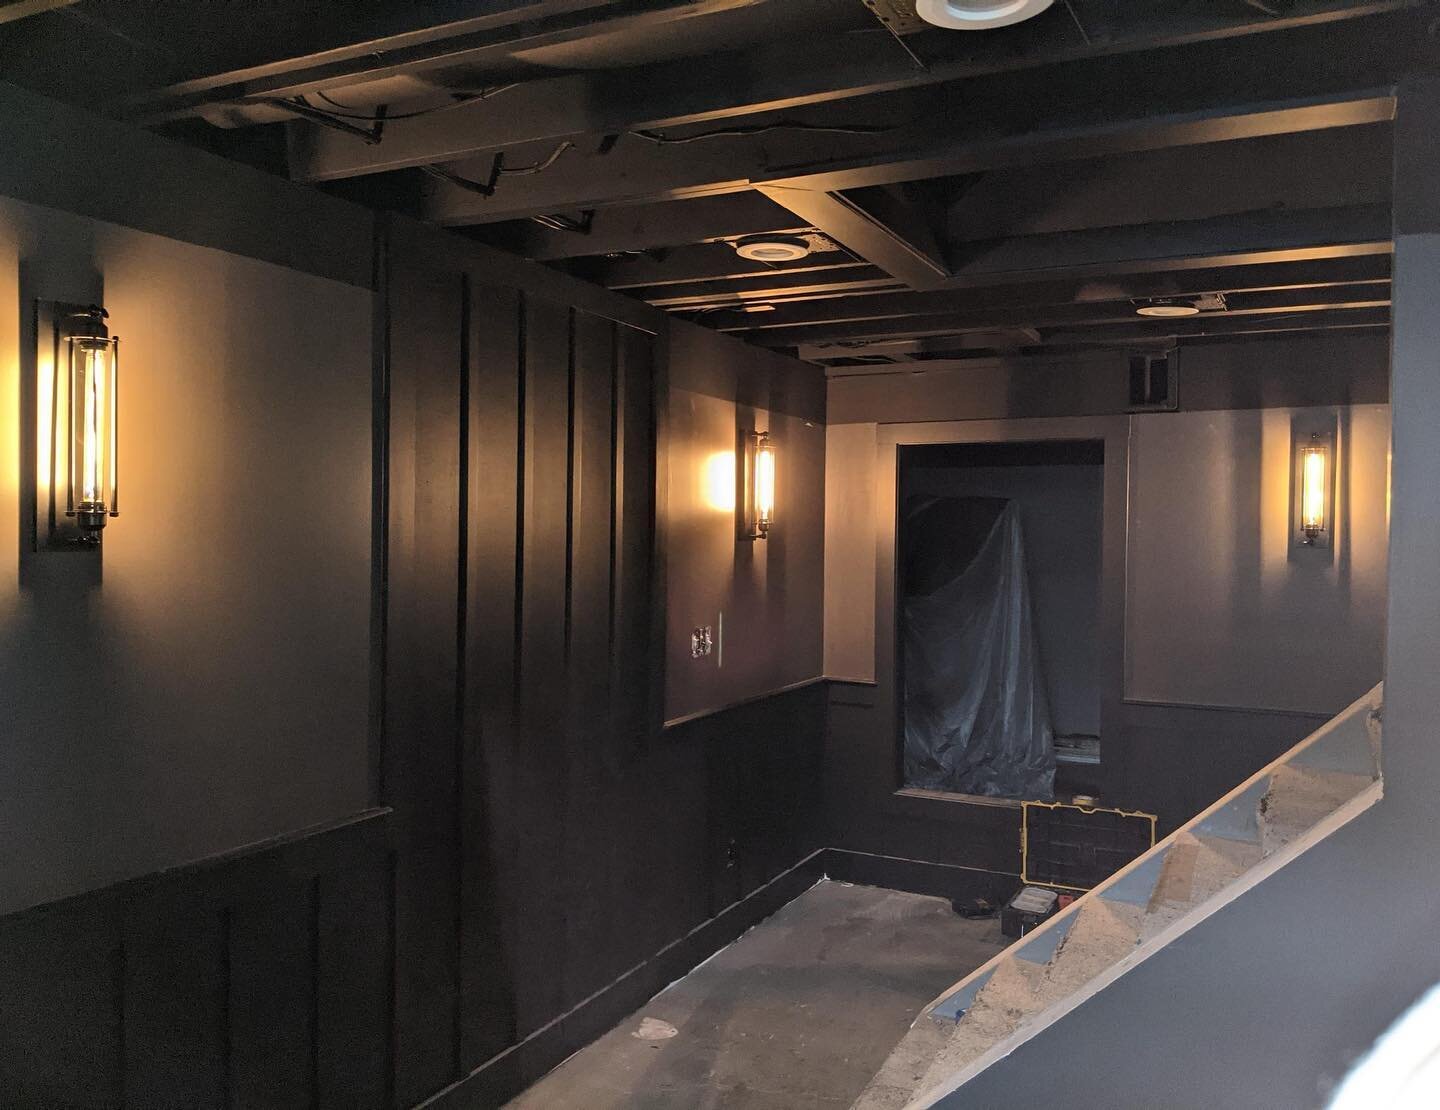 Black painted ceilings and dark colors are giving this basement a pub like feel.  Custom bar and exercise room are being built next.